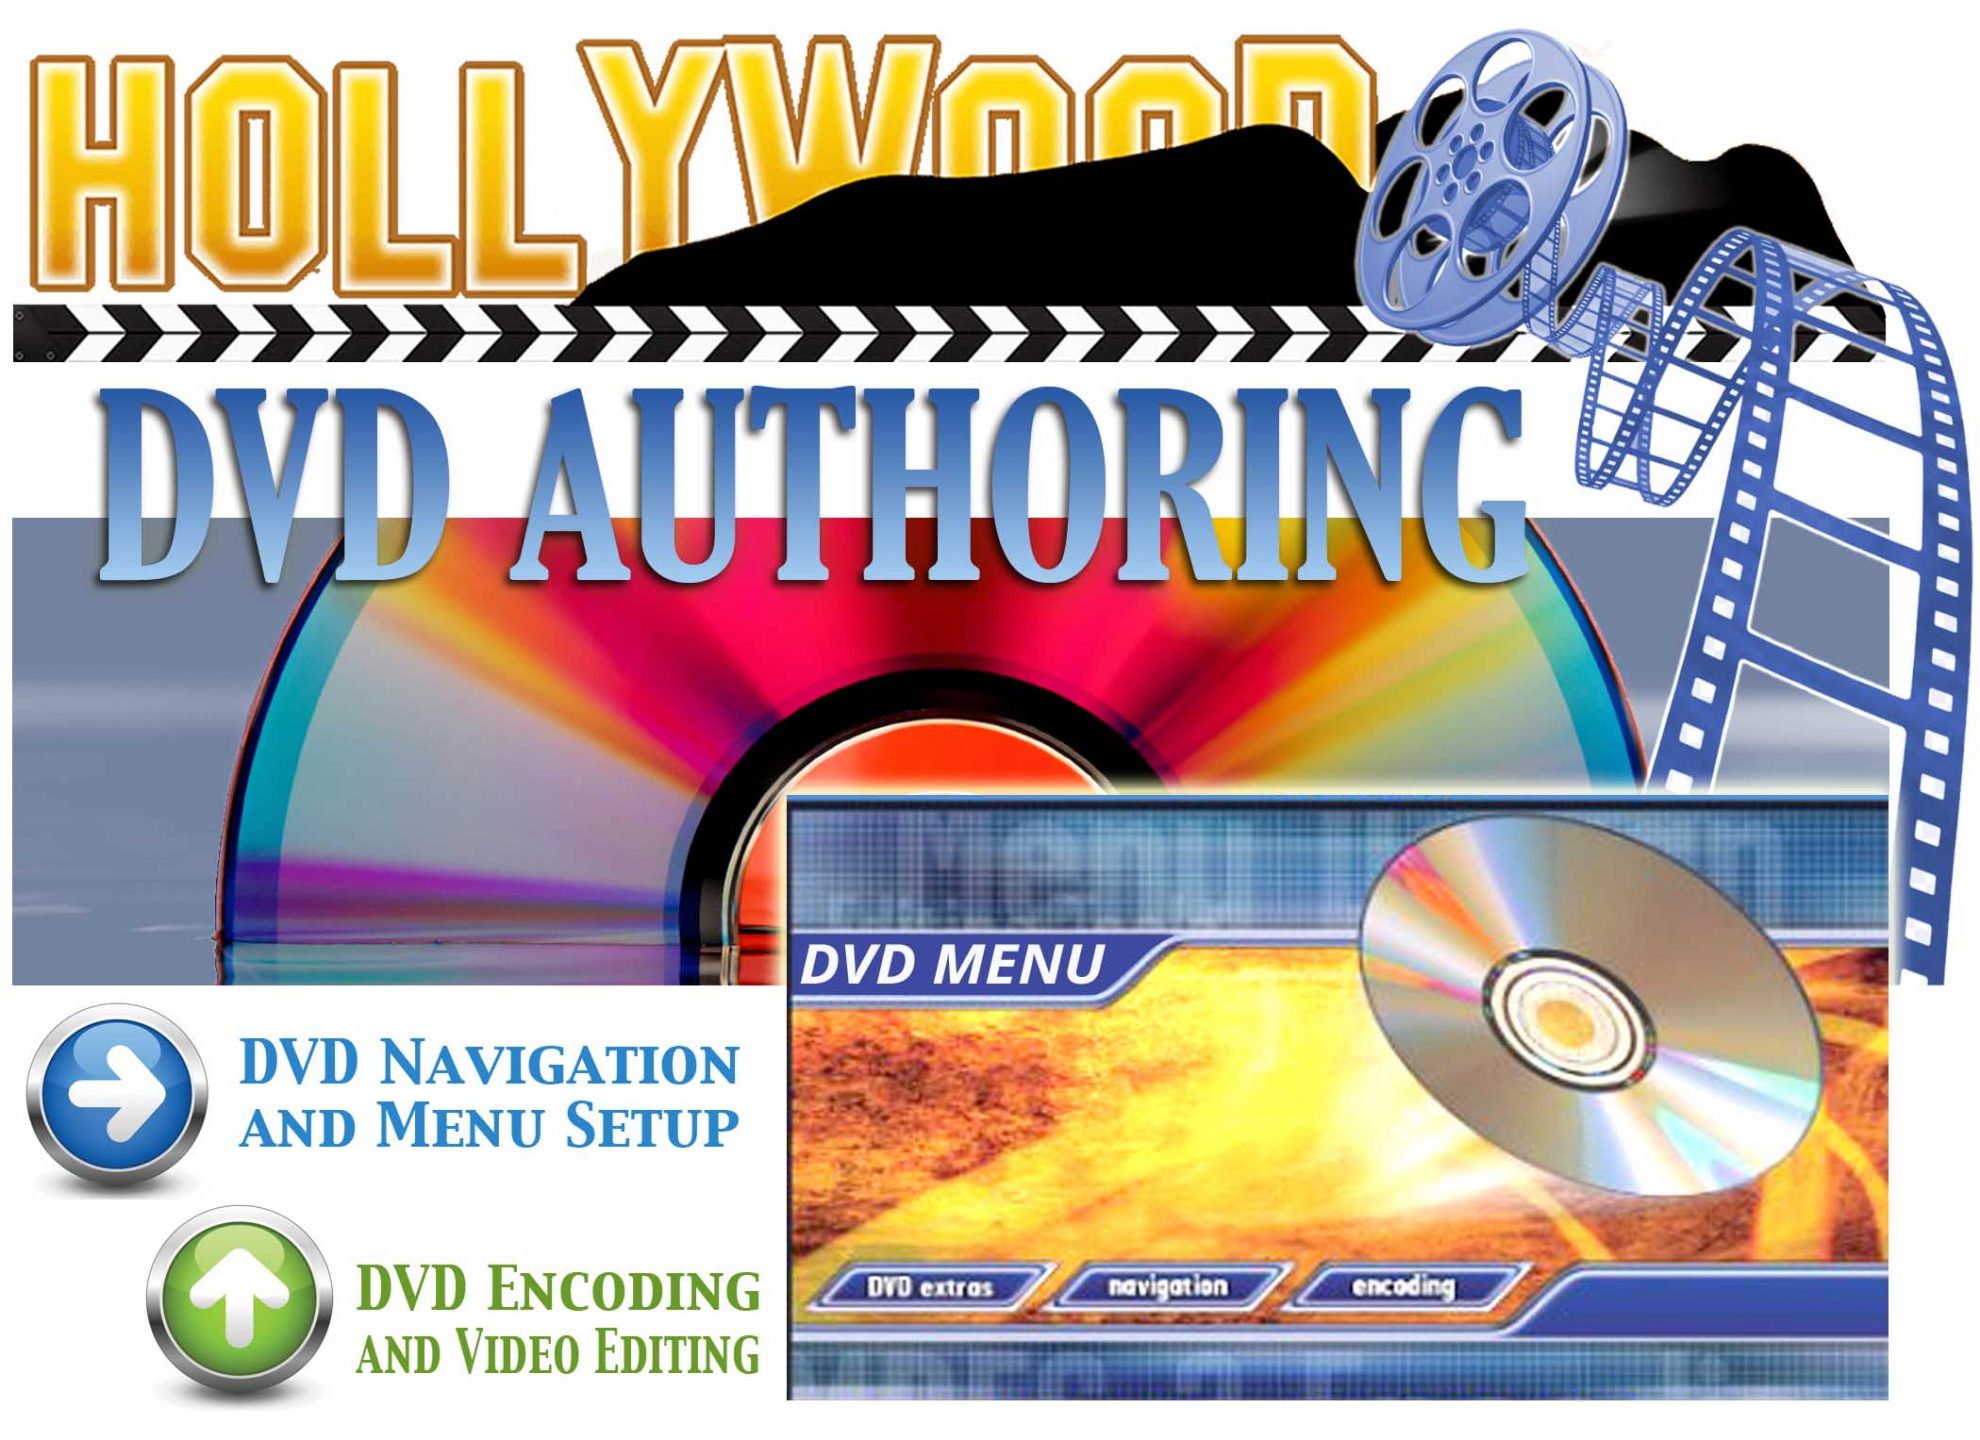 dvd authoring software free windows 10